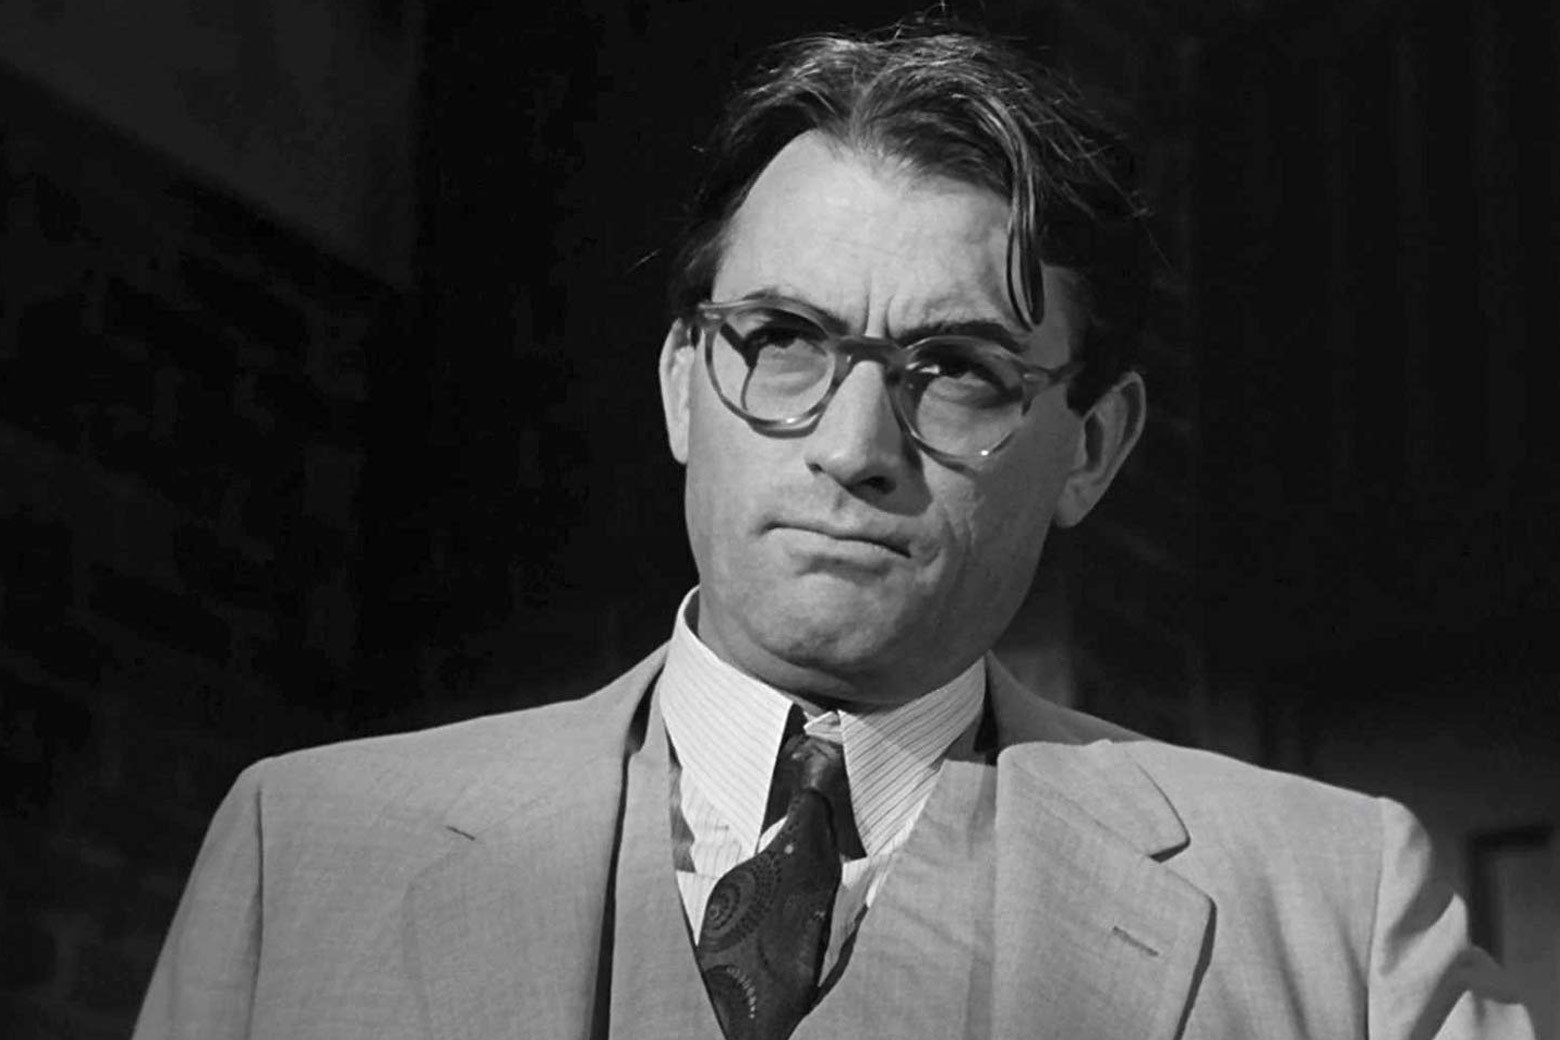 Gregory Peck as Atticus Finch in To Kill a Mockingbird.